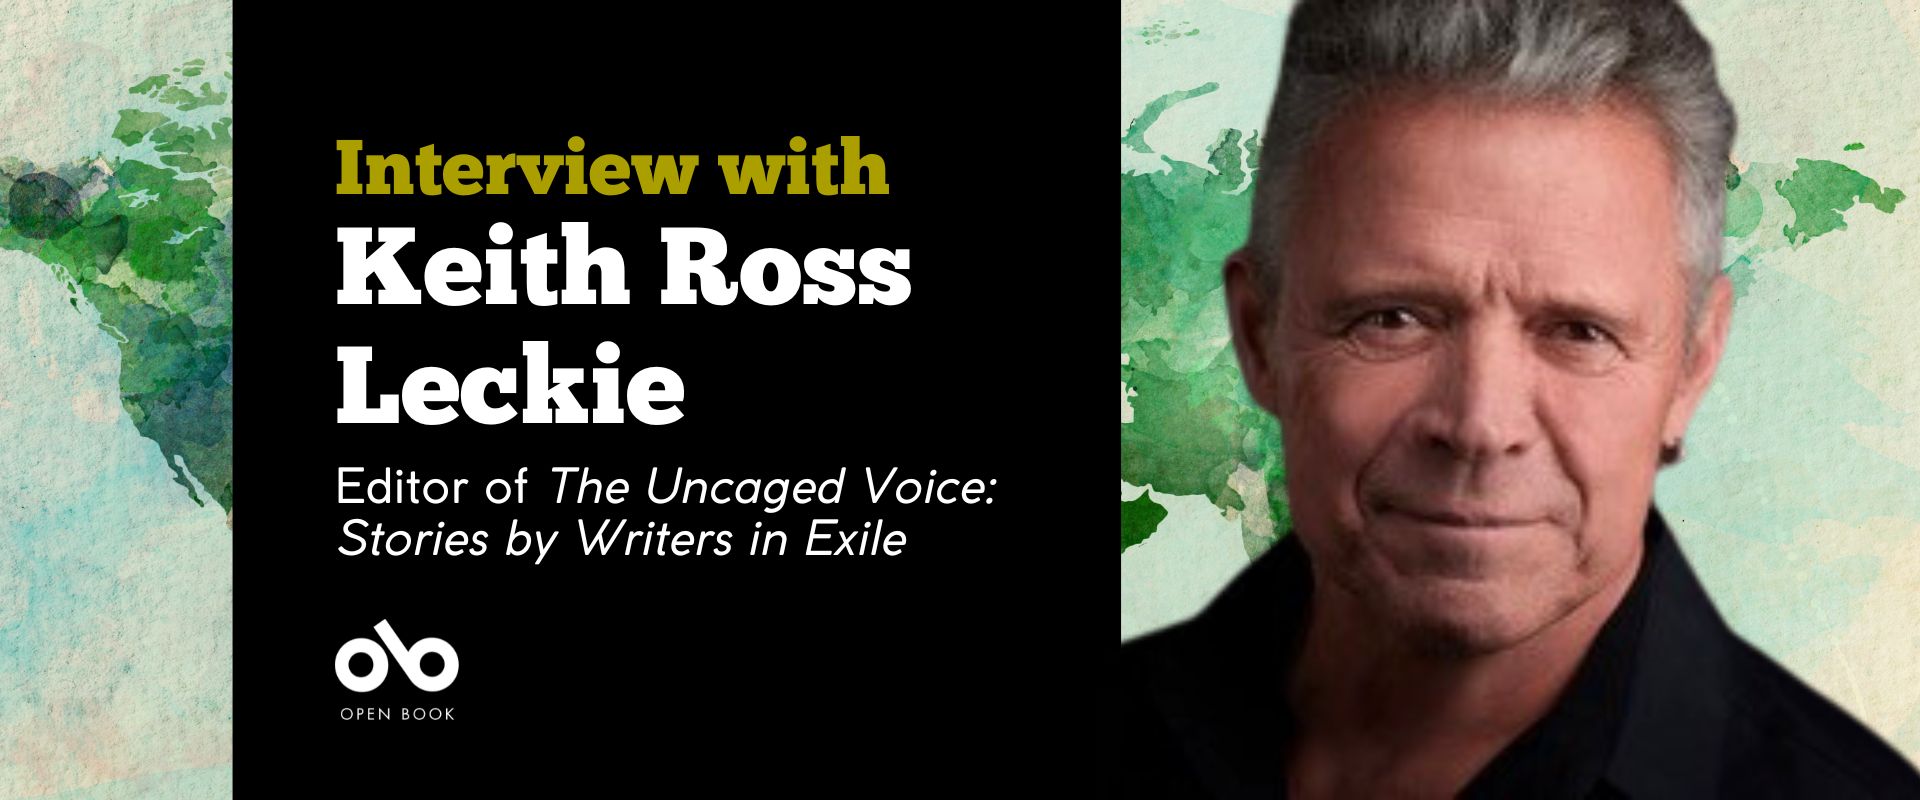 Banner image with watercolour image of a world map in the background. Foreground is a photo of editor and writer Keith Leckie with text reading Interview with Keith Ross Leckie. Editor of The Uncaged Voice: Stories by Writers in Exile. Open Book logo bottom left